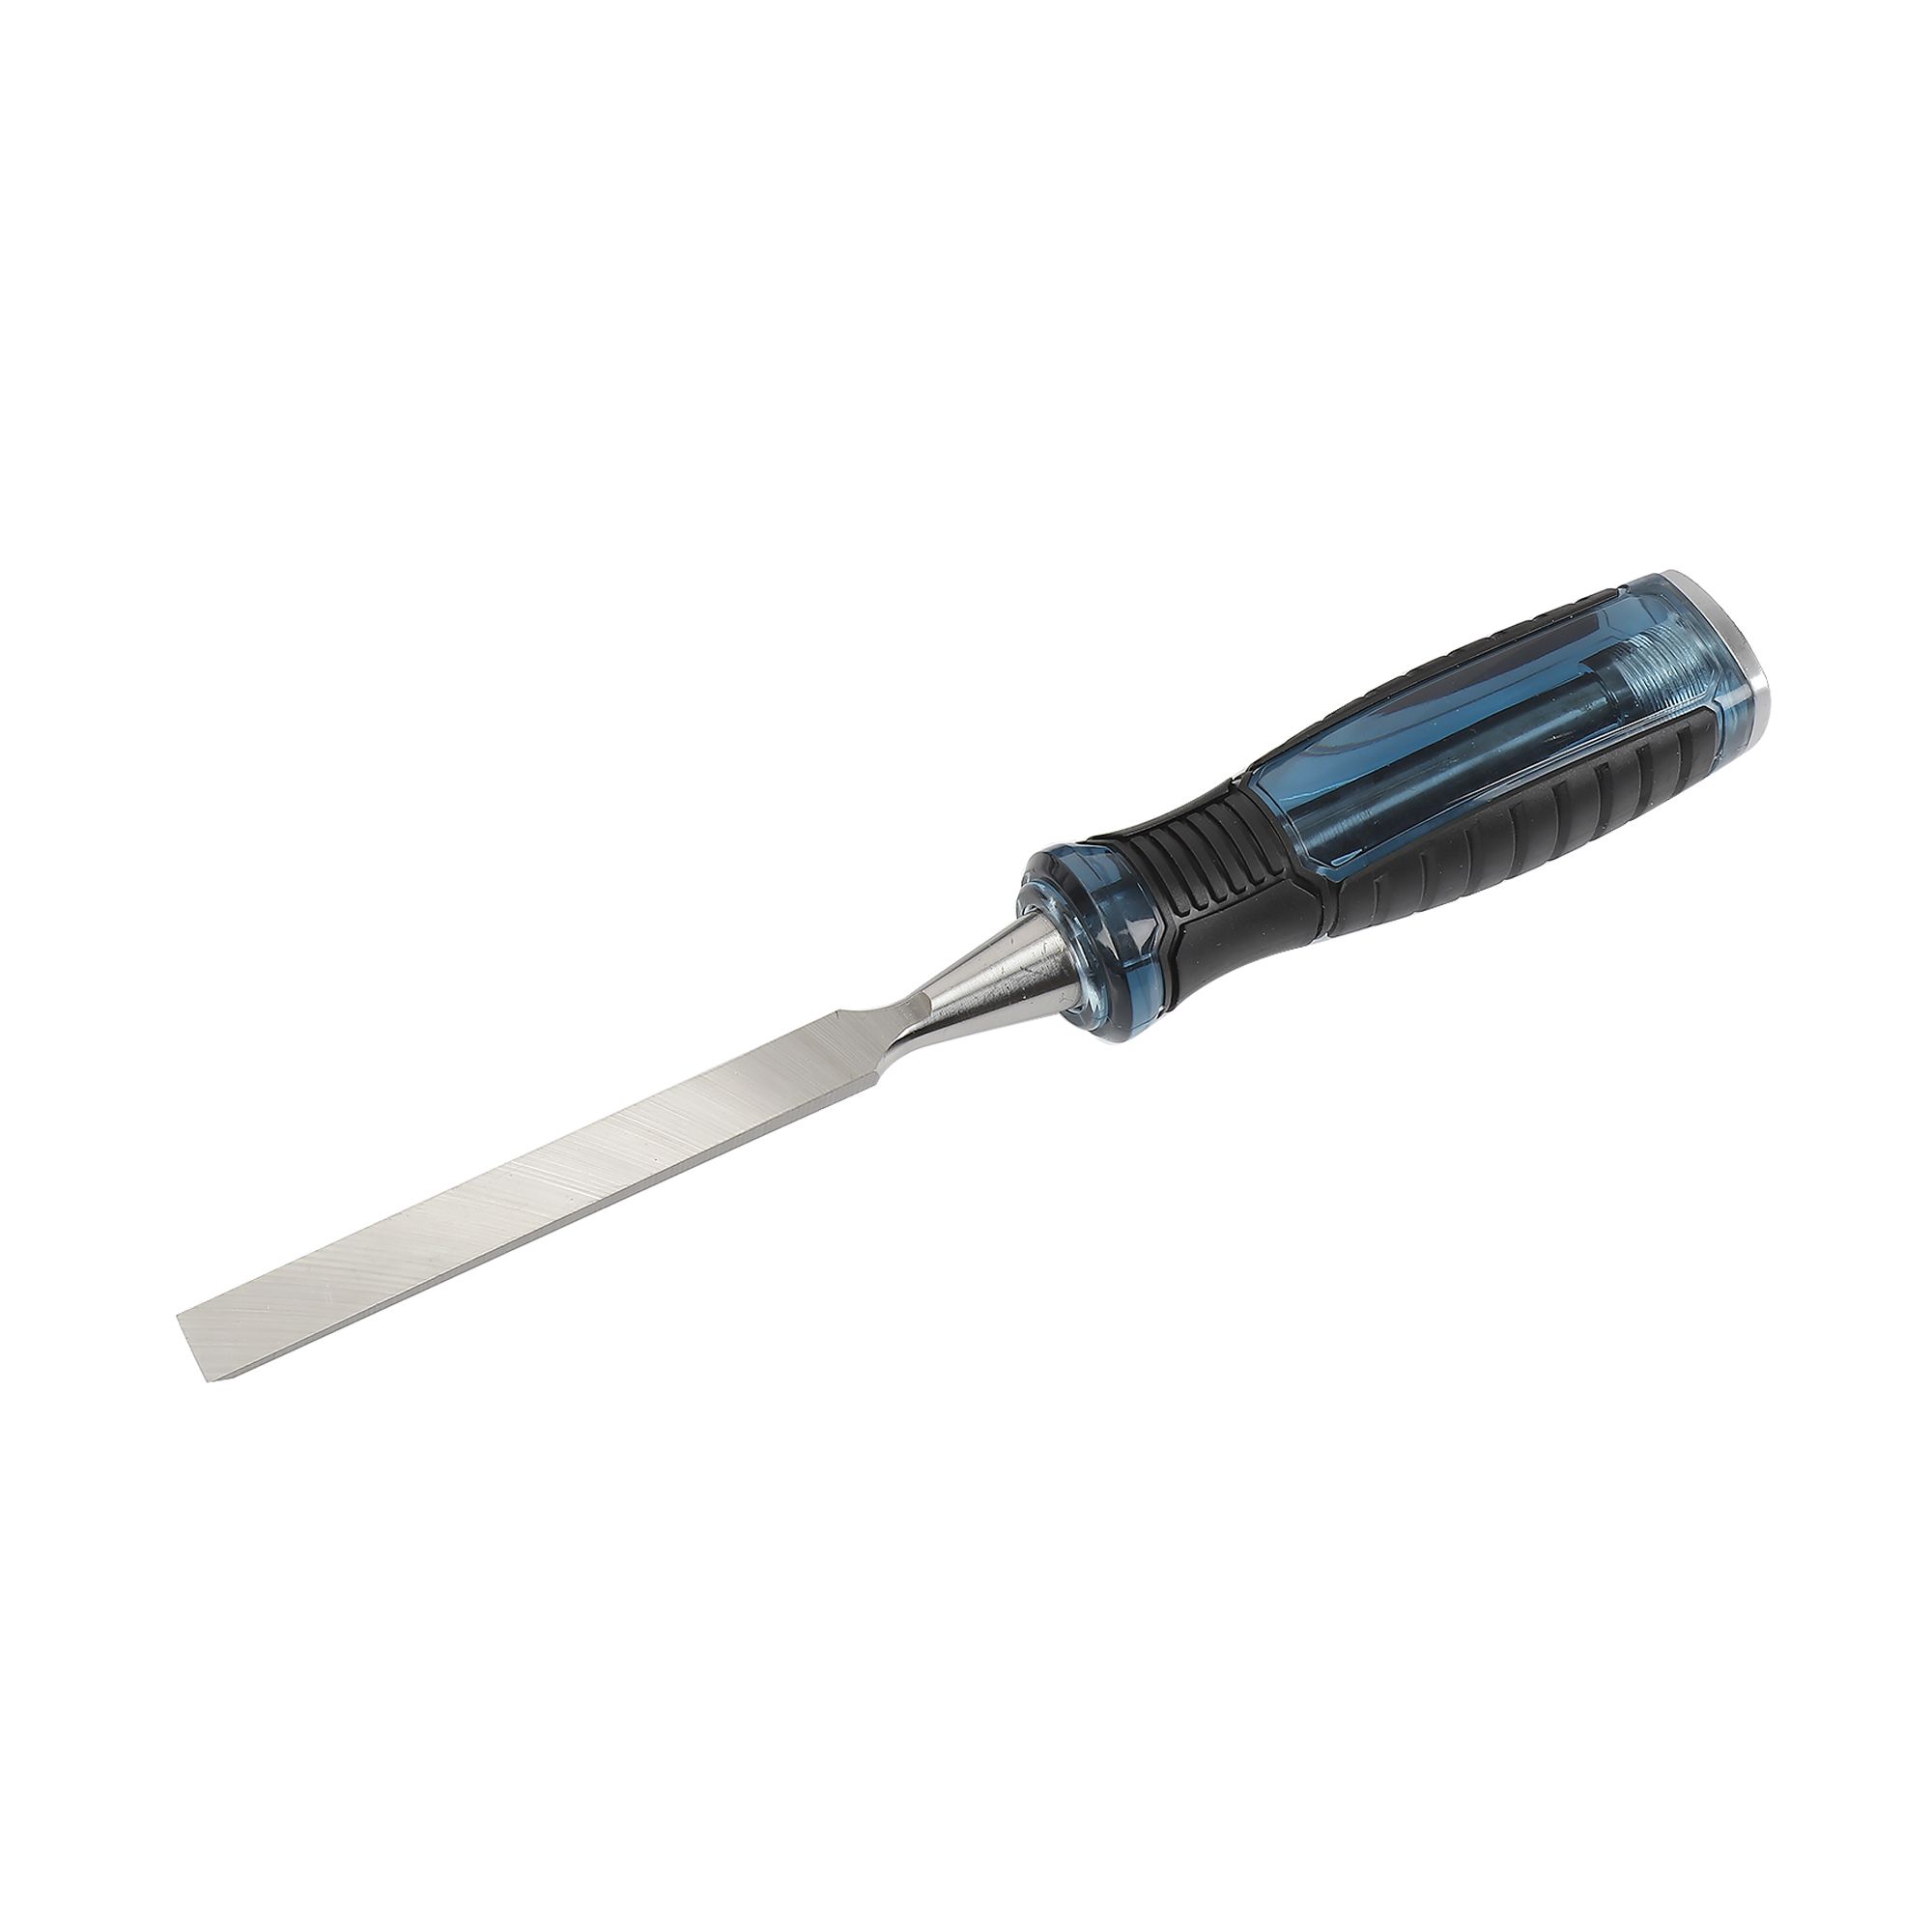 Erbauer 12mm Wood chisel